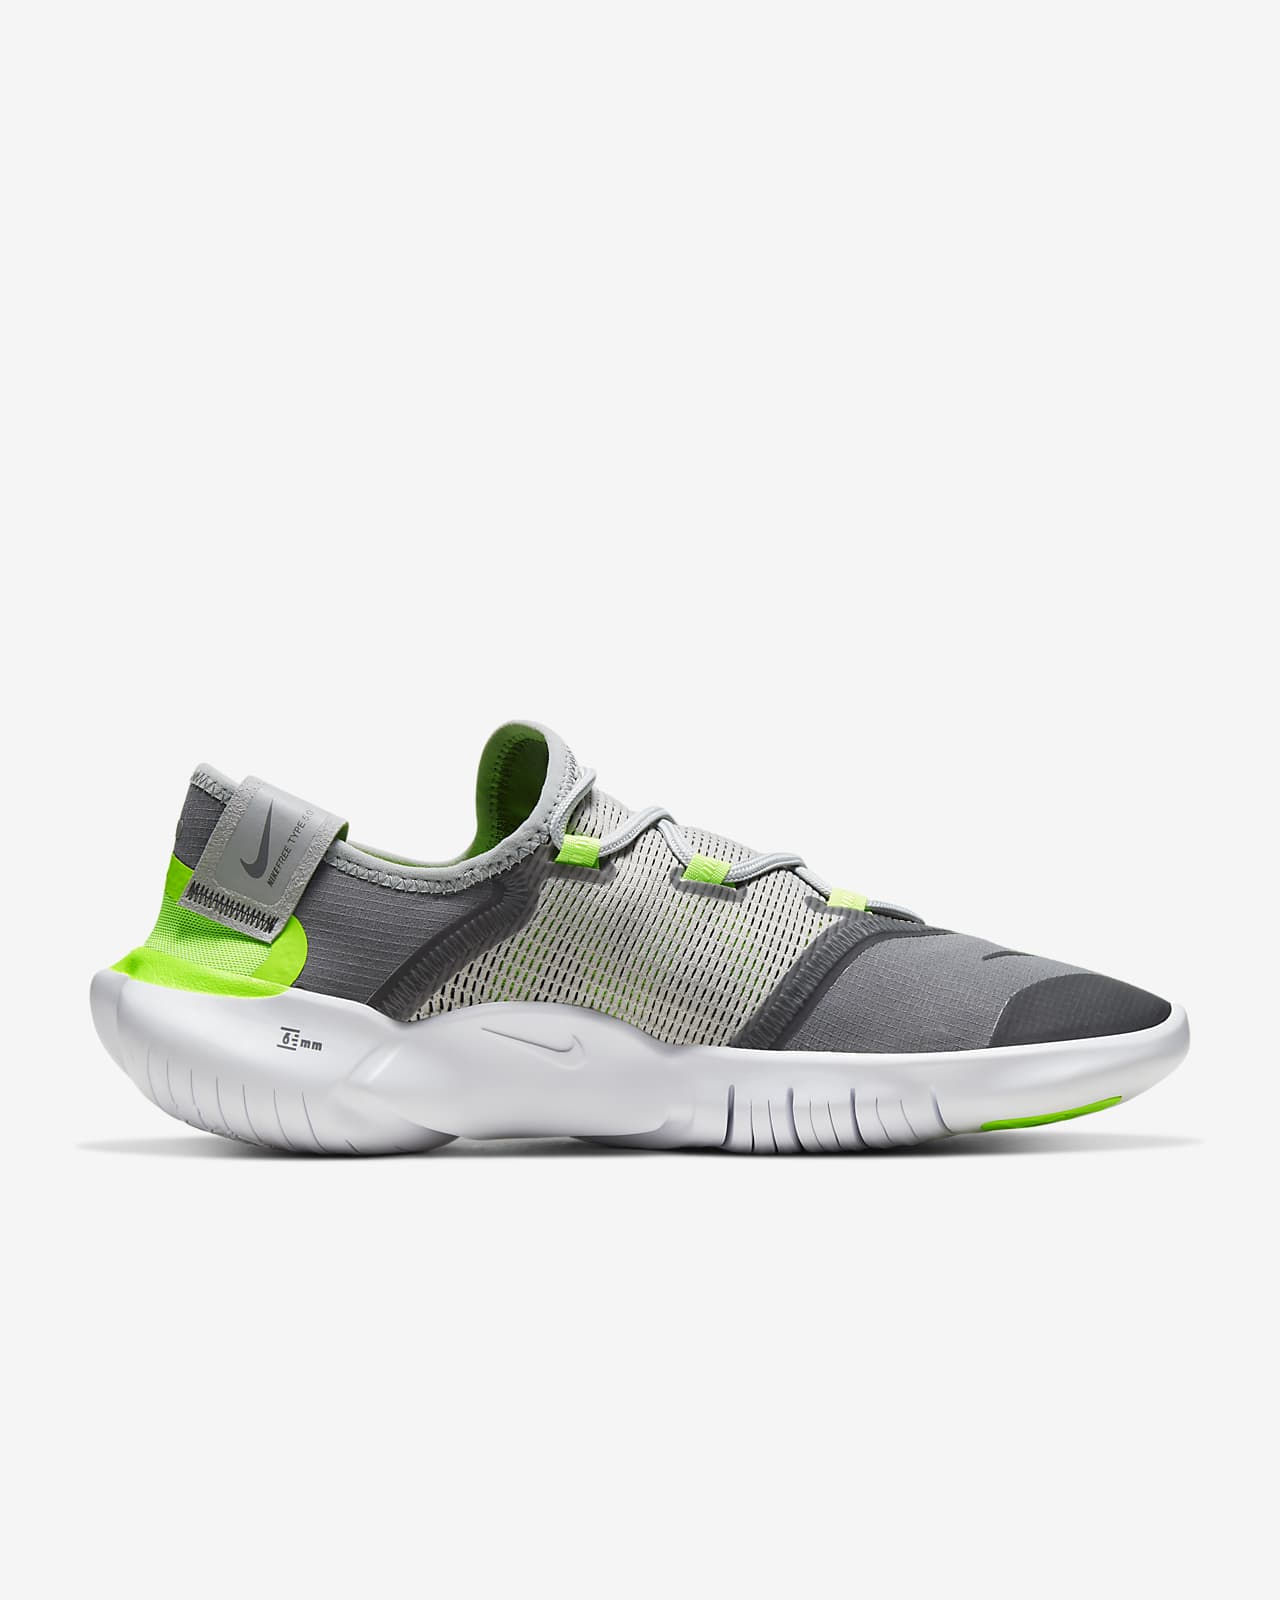 nike 5.0 shoes price